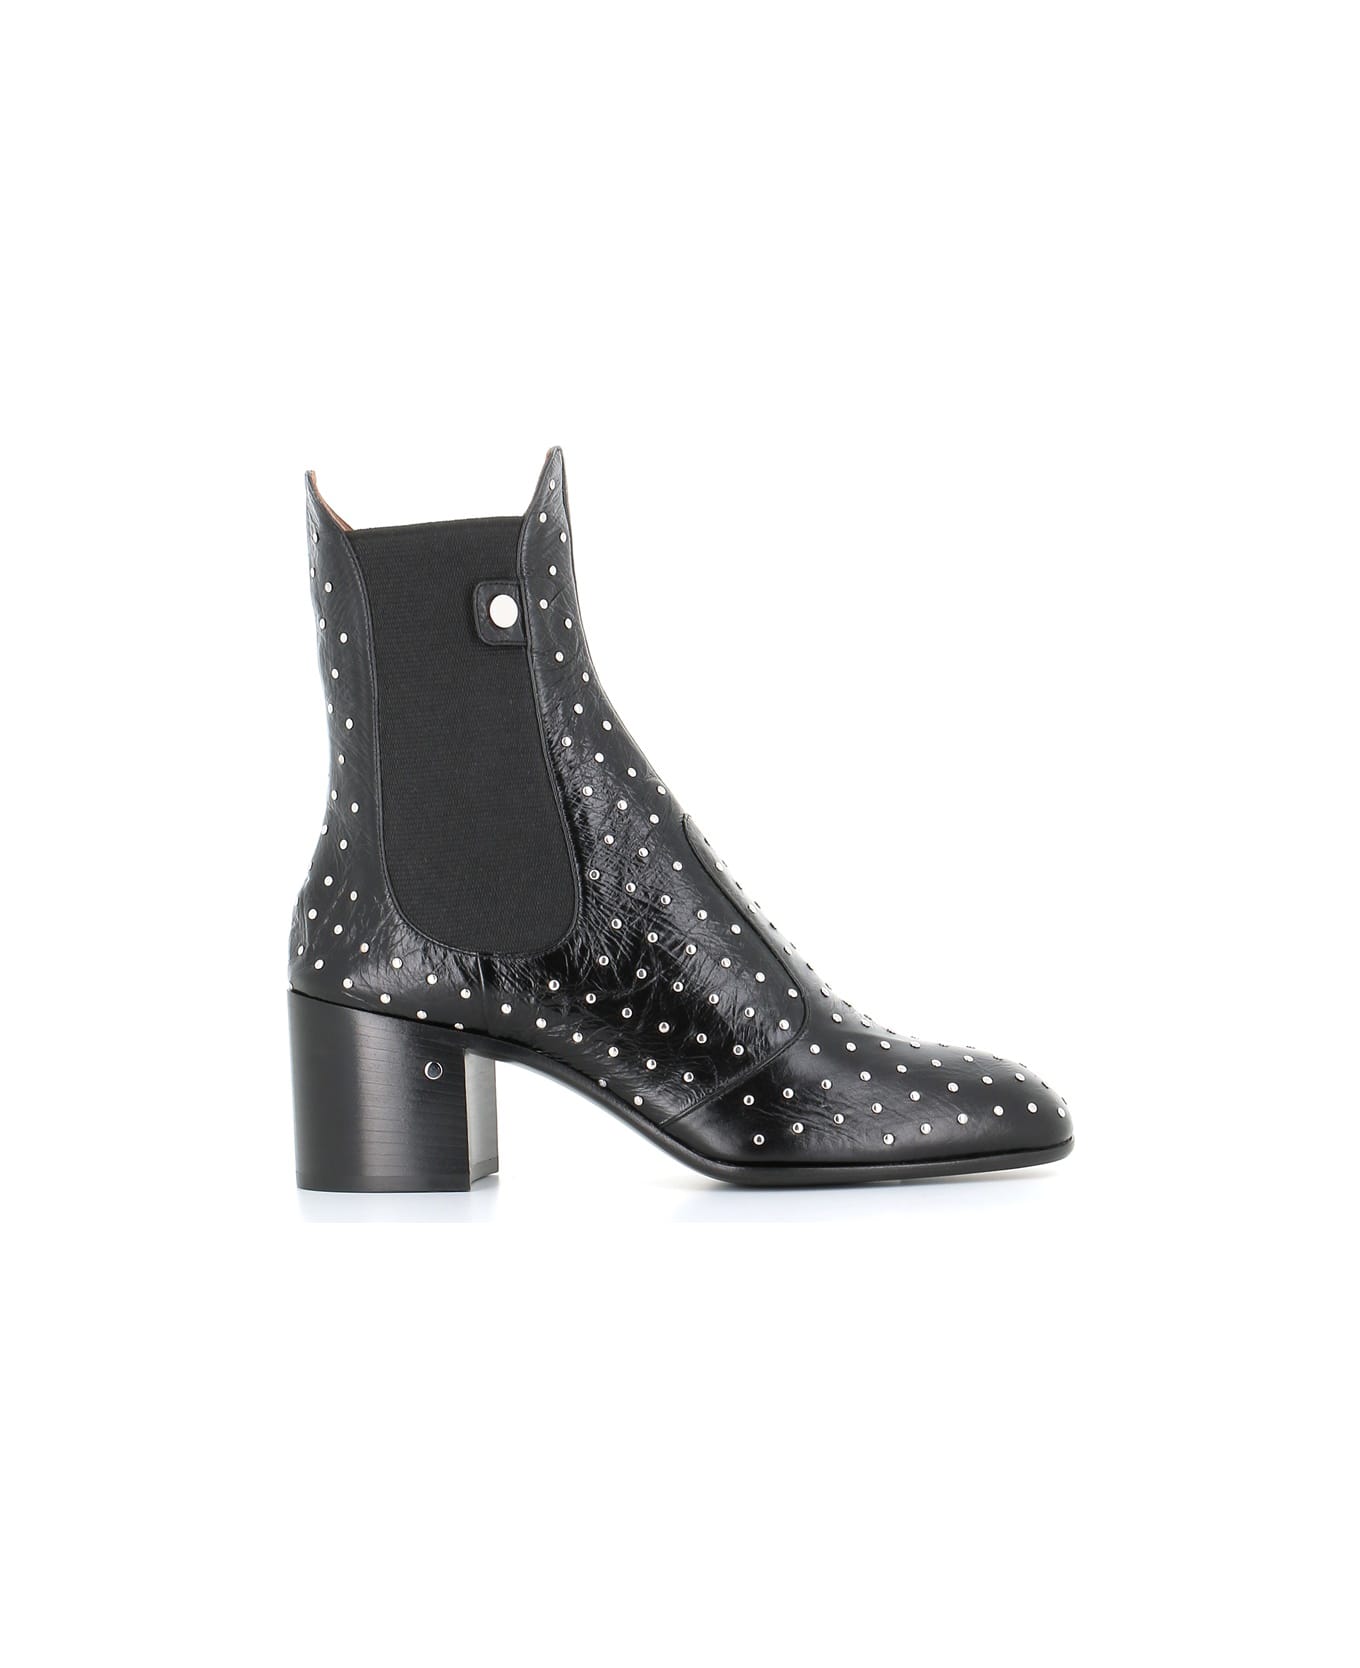 Laurence Dacade Boot Angie - Black ブーツ